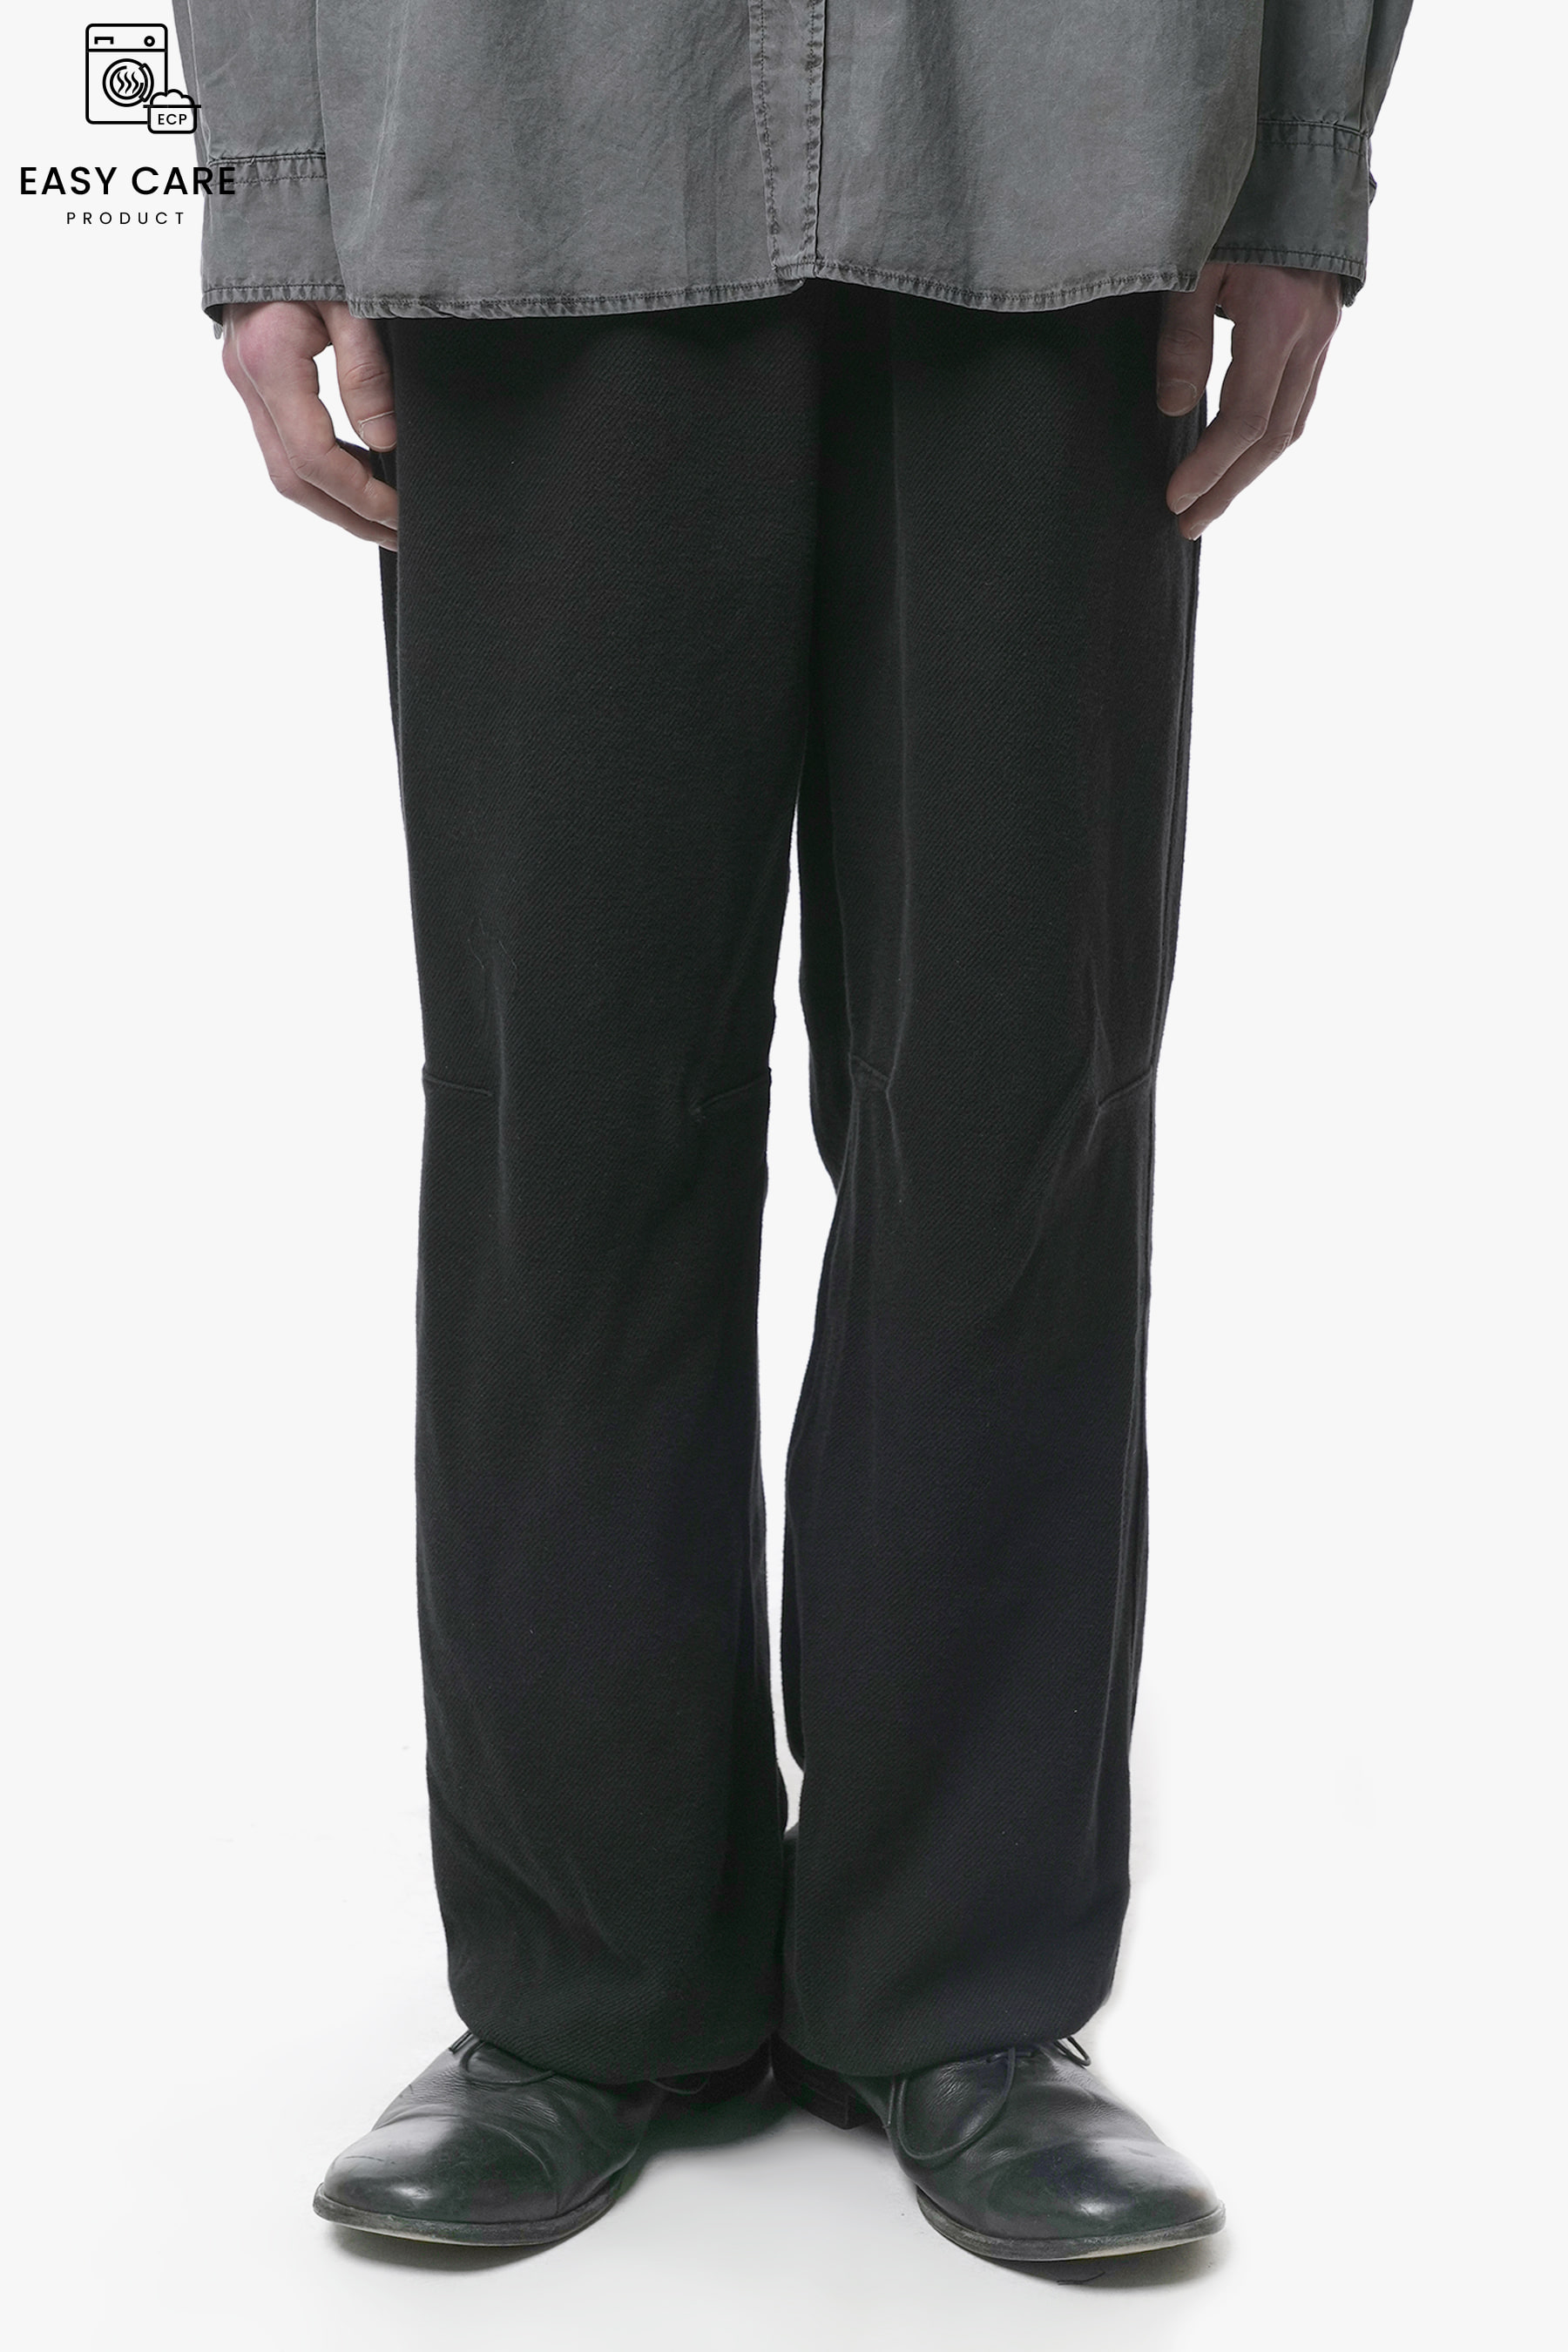 BLACK WASHED FRENCH TERRY COTTON DRILL SWEAT PANTS (ECP GARMENT PROCESS)